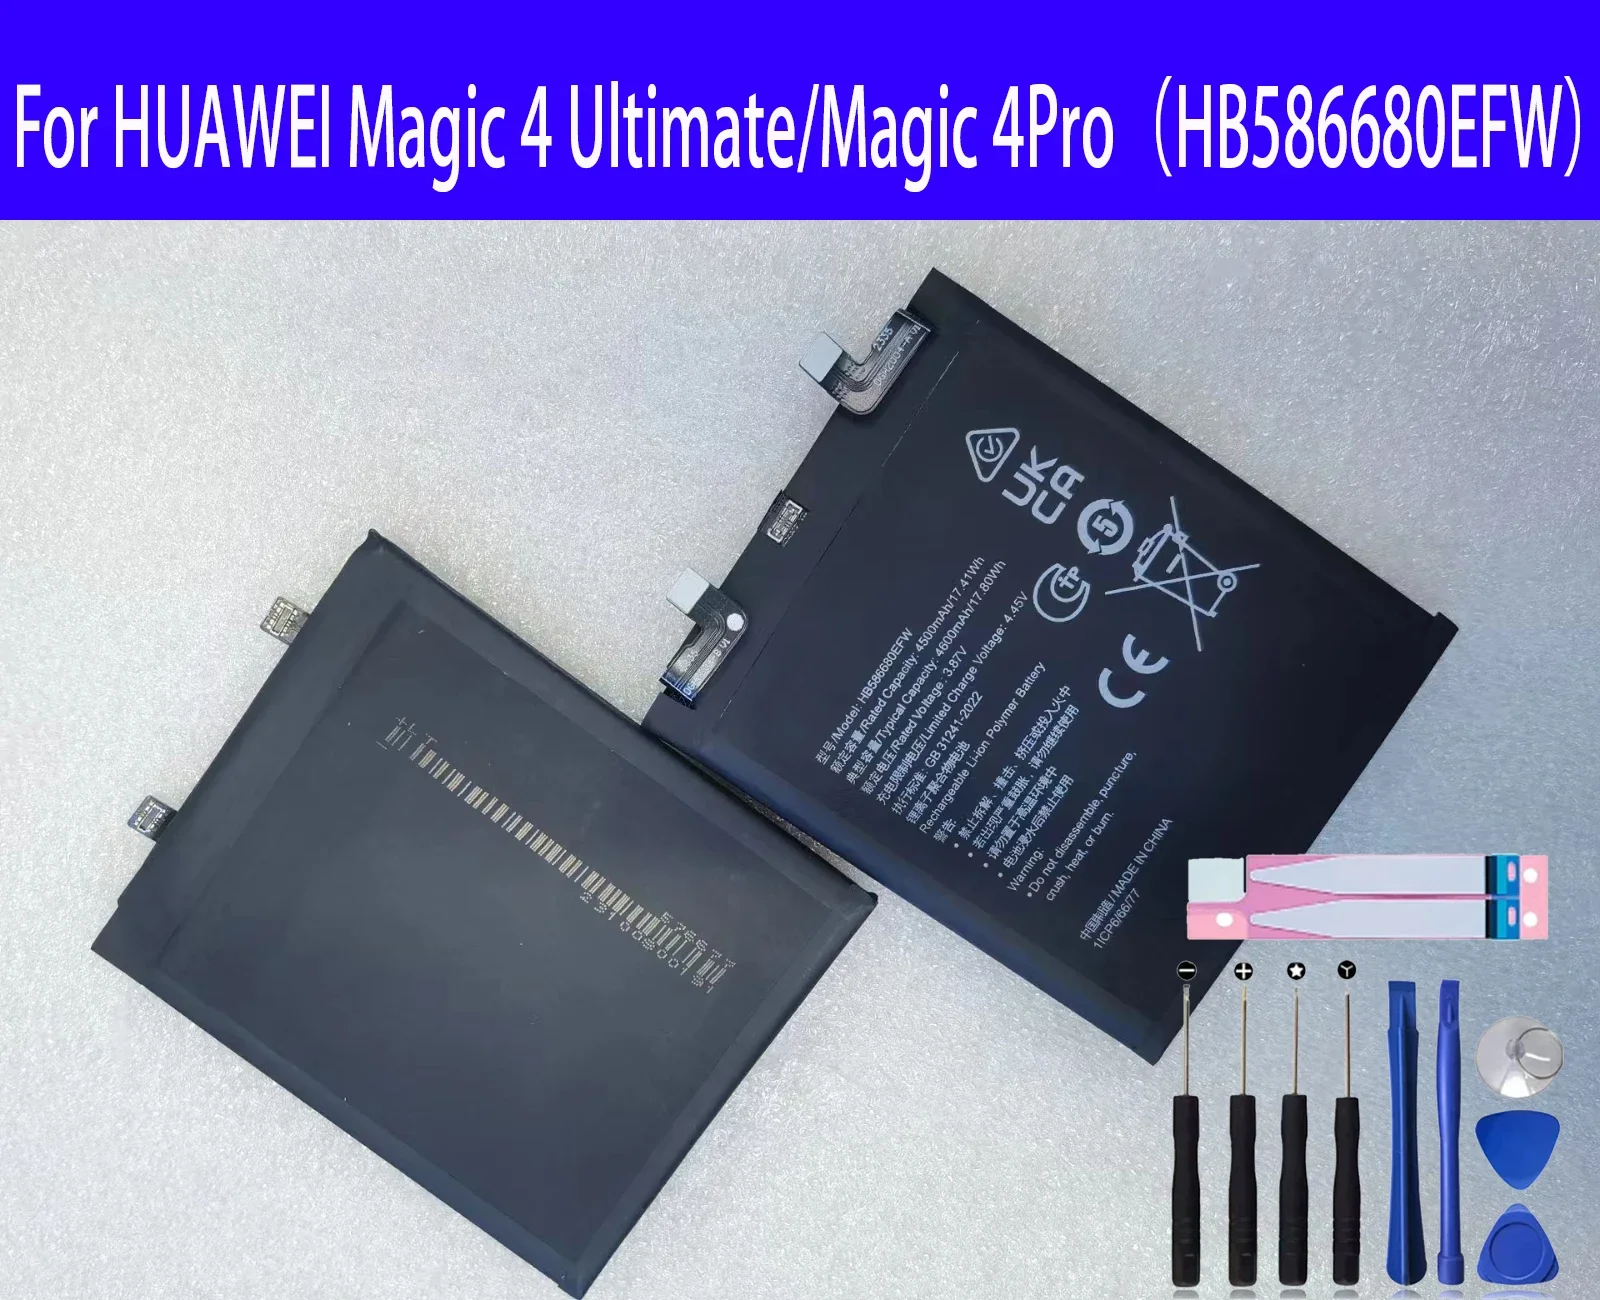 

100% Original New Replacement Battery HB586680EFW For HUAWEI Magic 4 Ultimate /Magic 4Pro Phone Battery+Tools